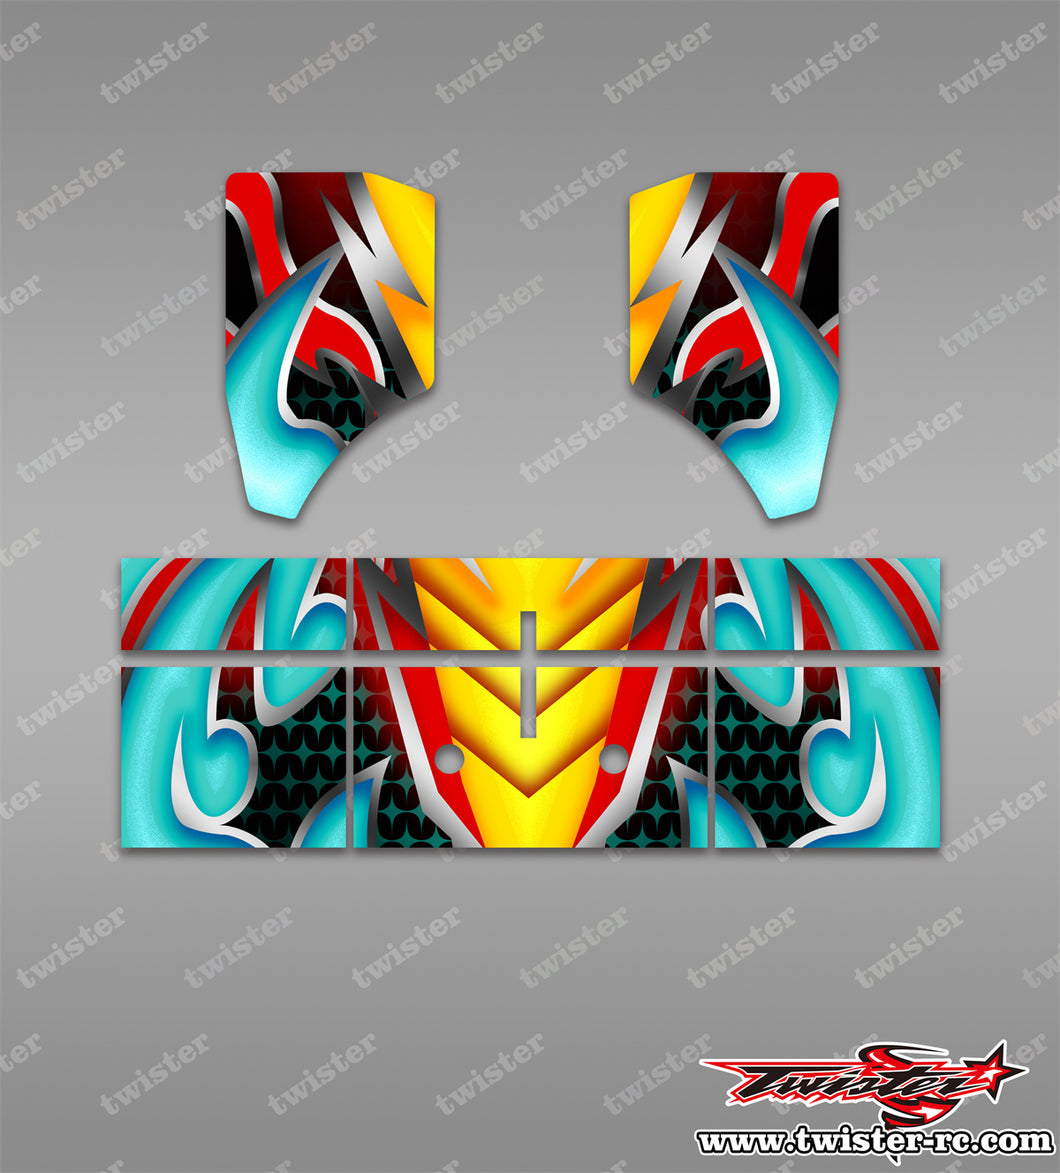 TR-NBW-MA20  Tekno NB48 2.0 Wing Metallochrome/Optical white Wave Pattern Wrap ( Type A20 ) 4 colors